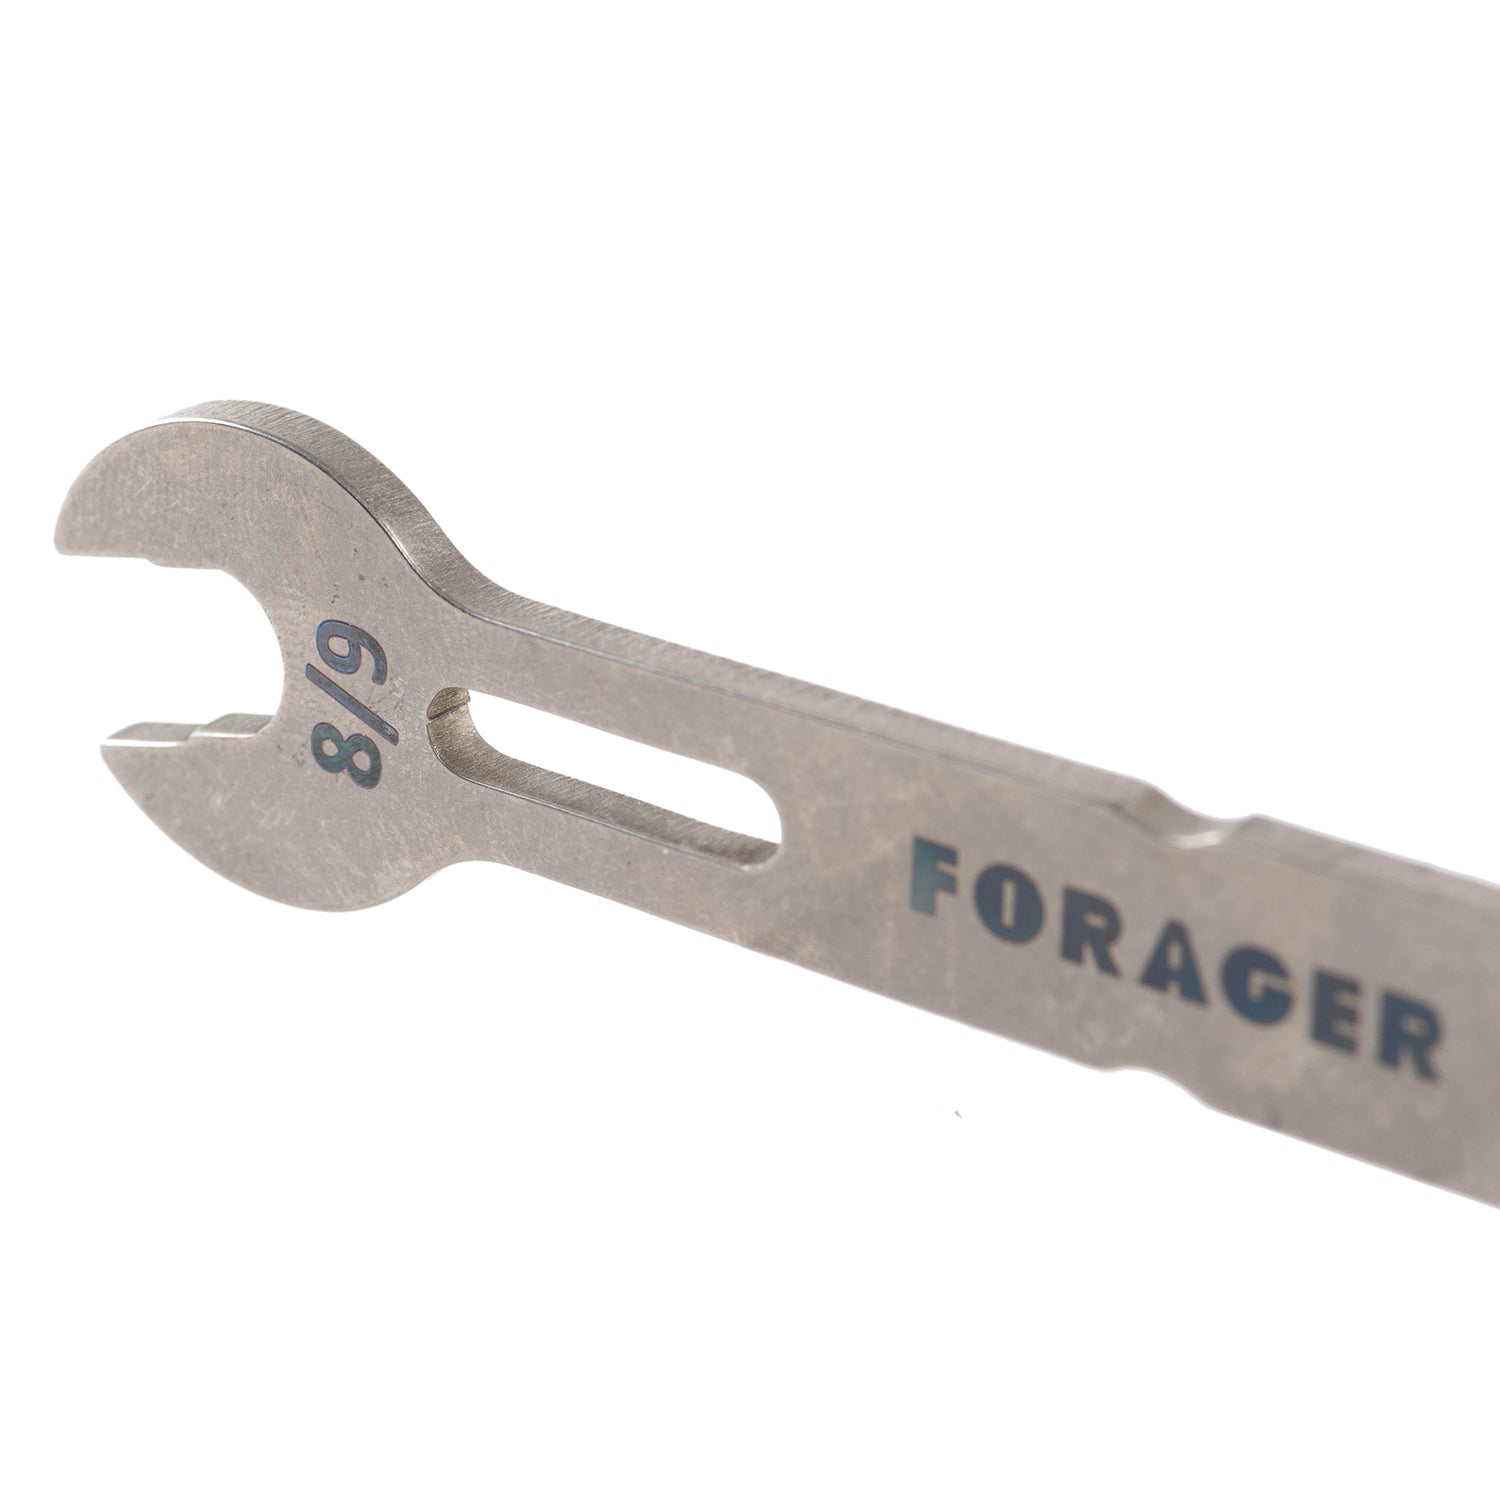 FORAGER CYCLES The Link Wrench